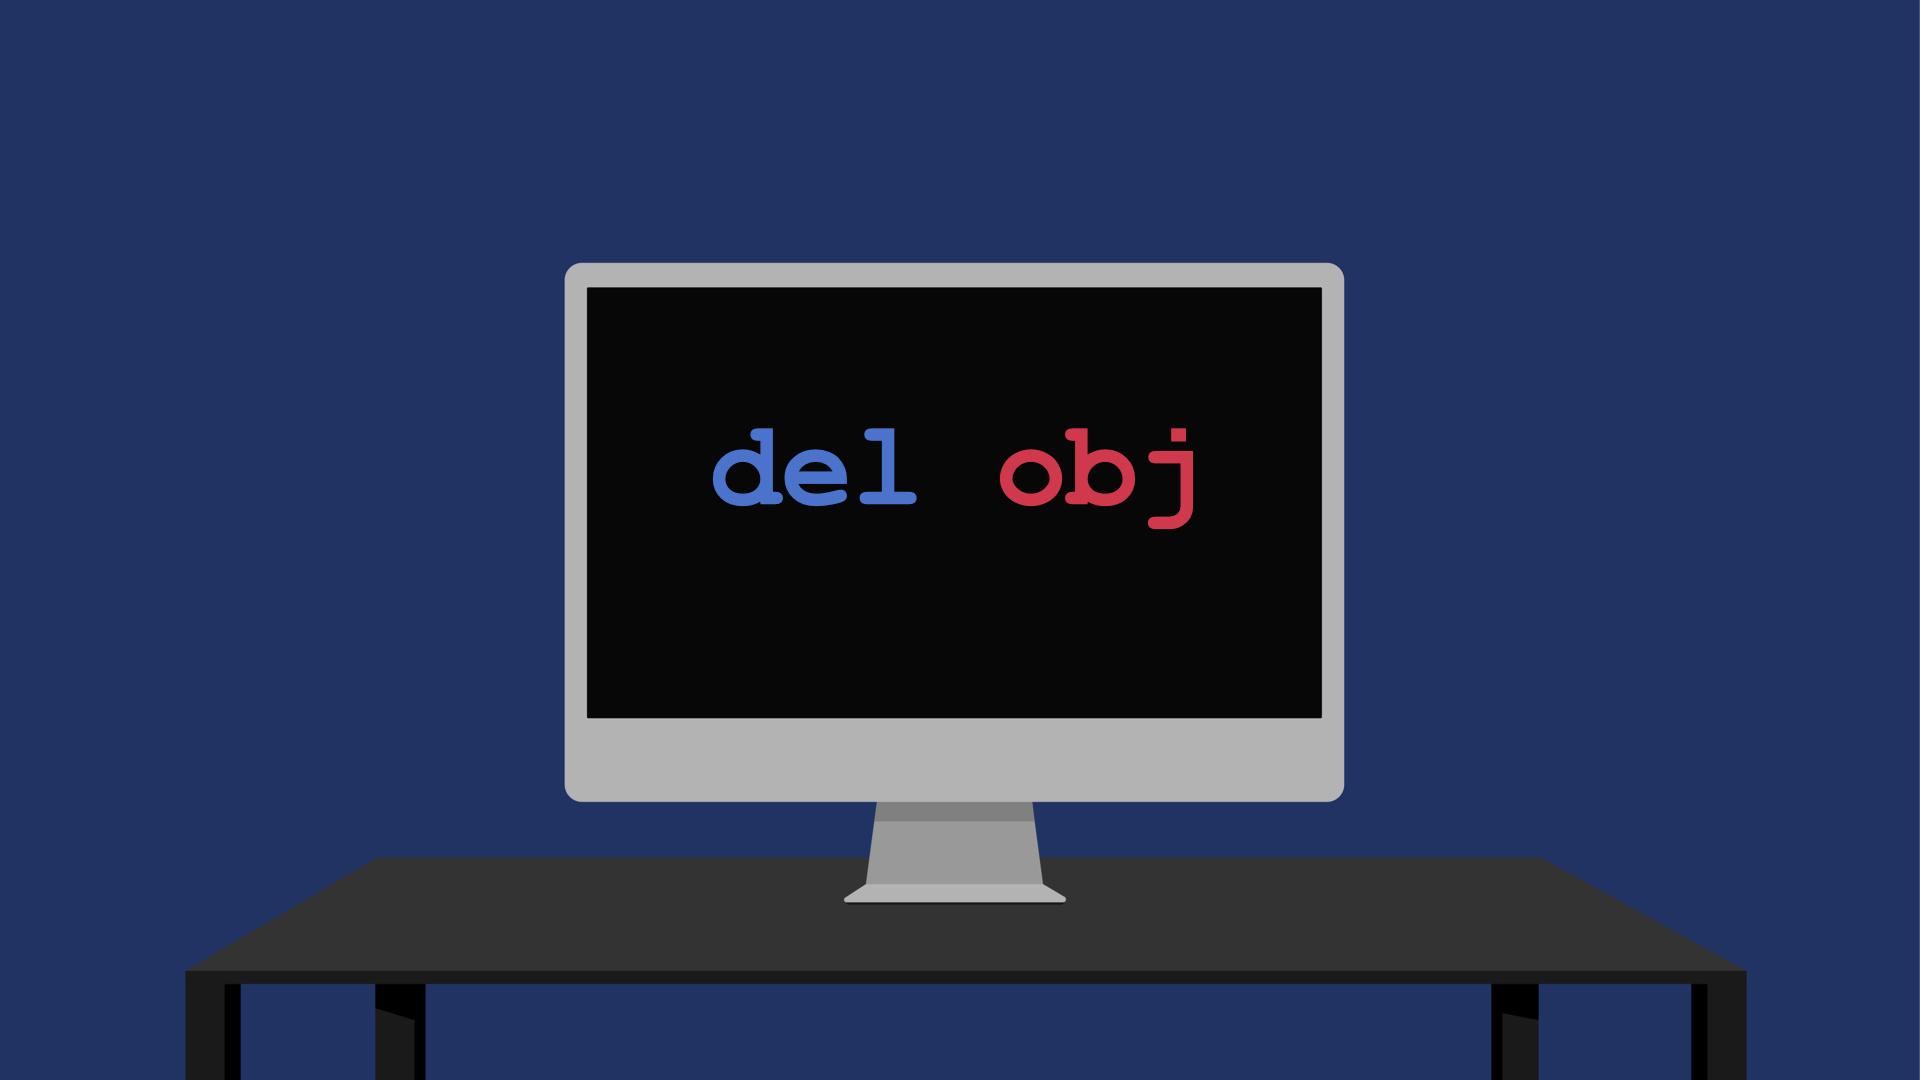 delete a Python object with the del statement